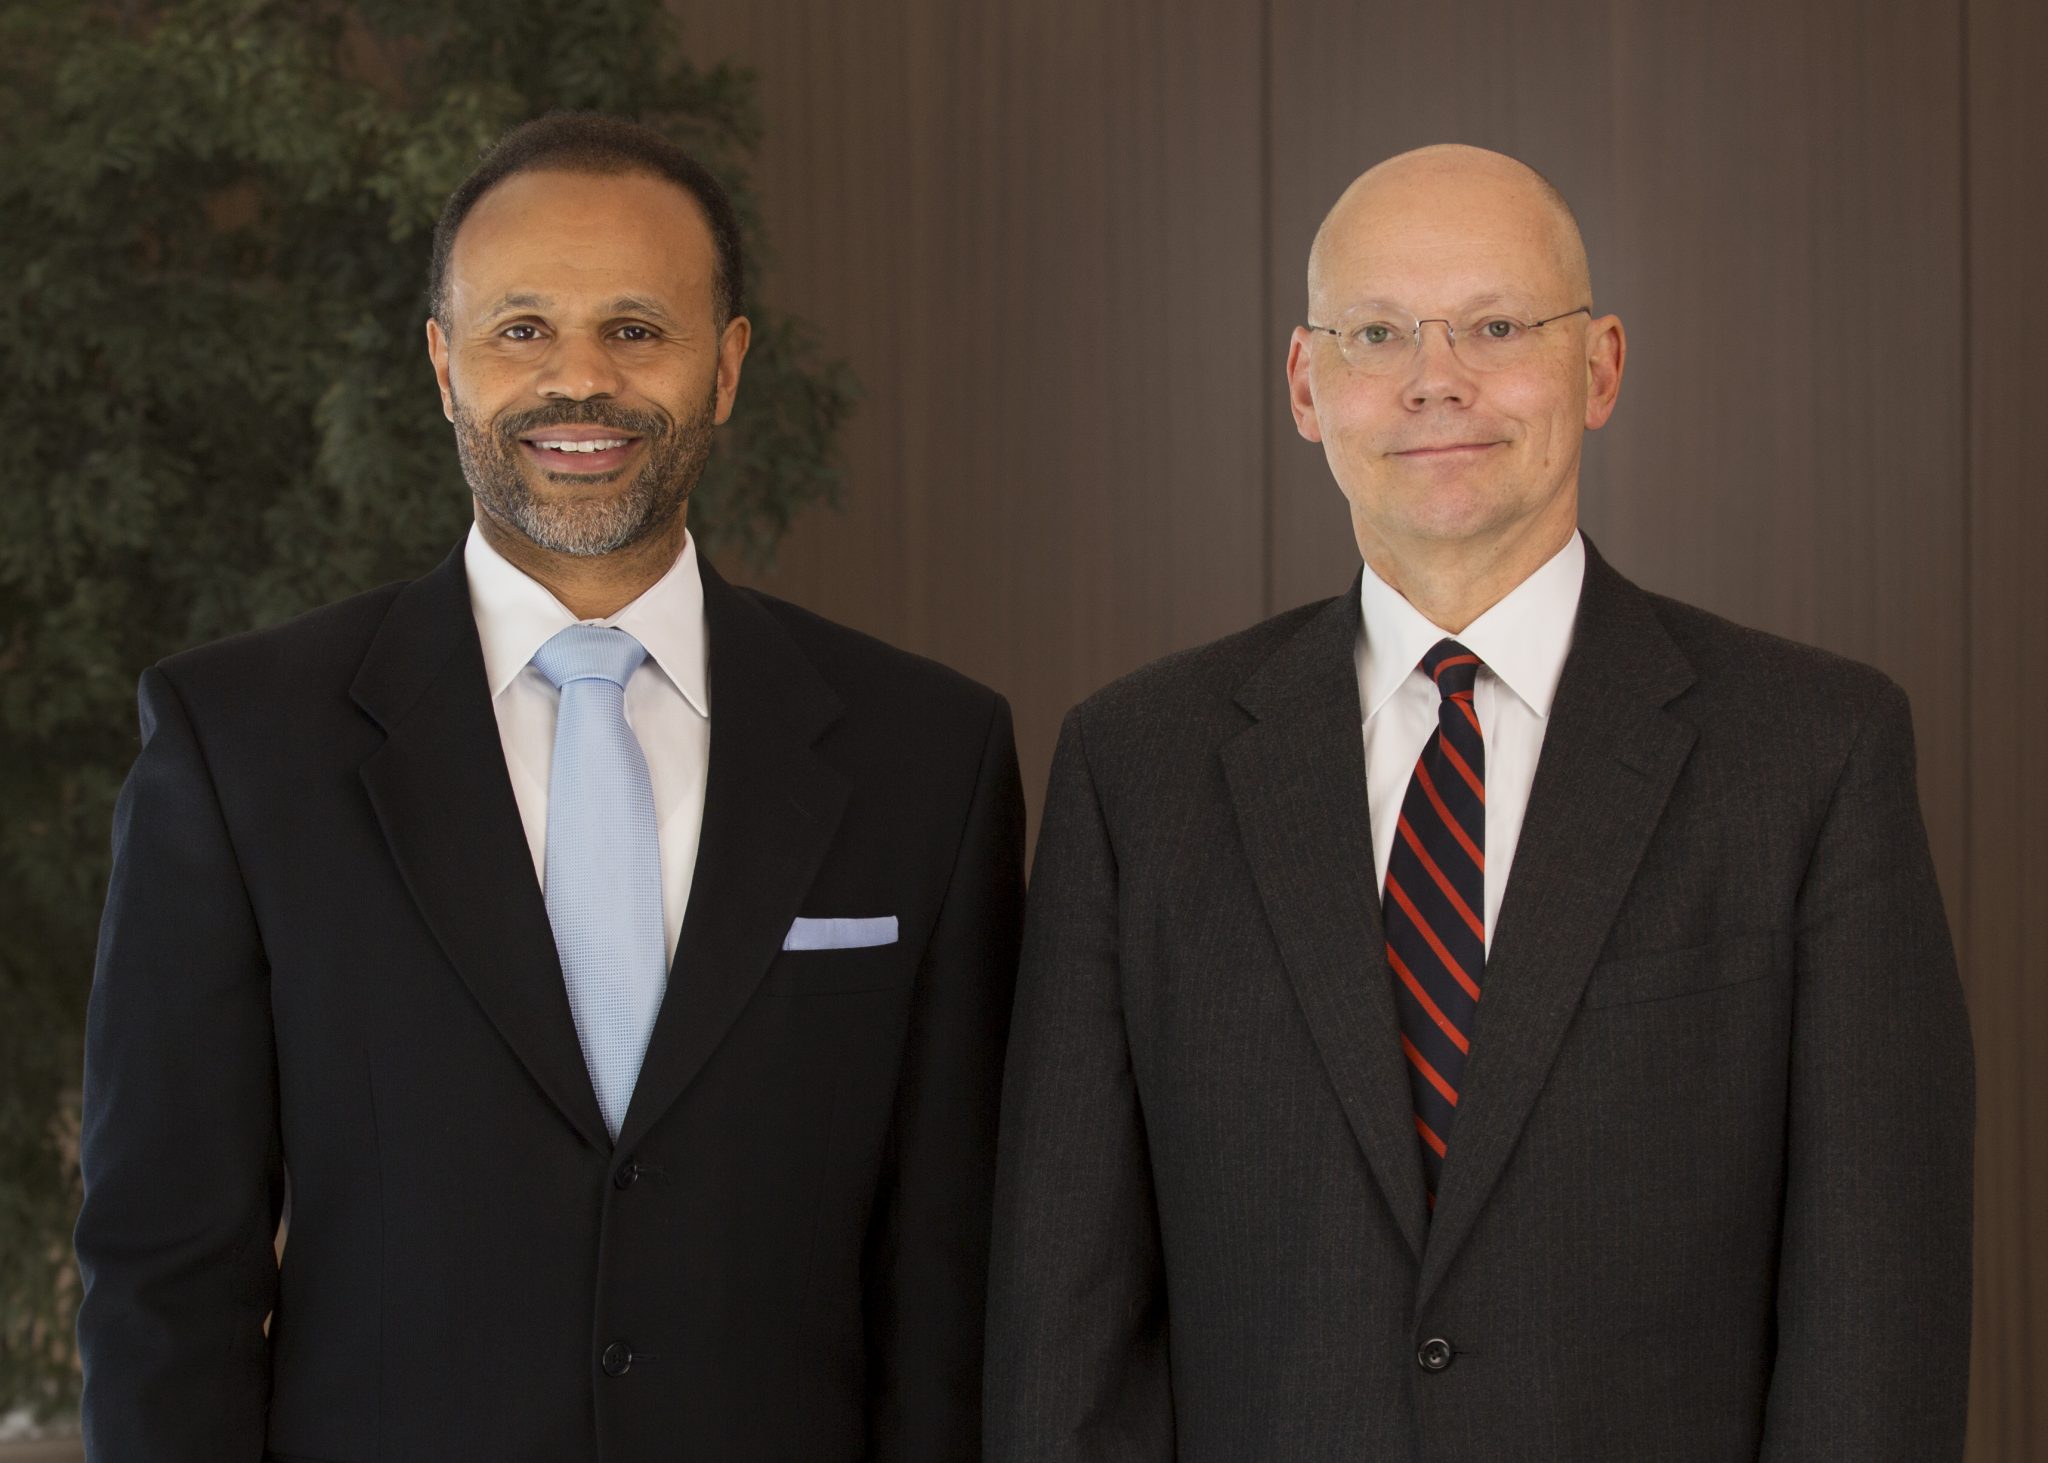 McGuireWoods LLP Names New Chairman & New Managing Partner